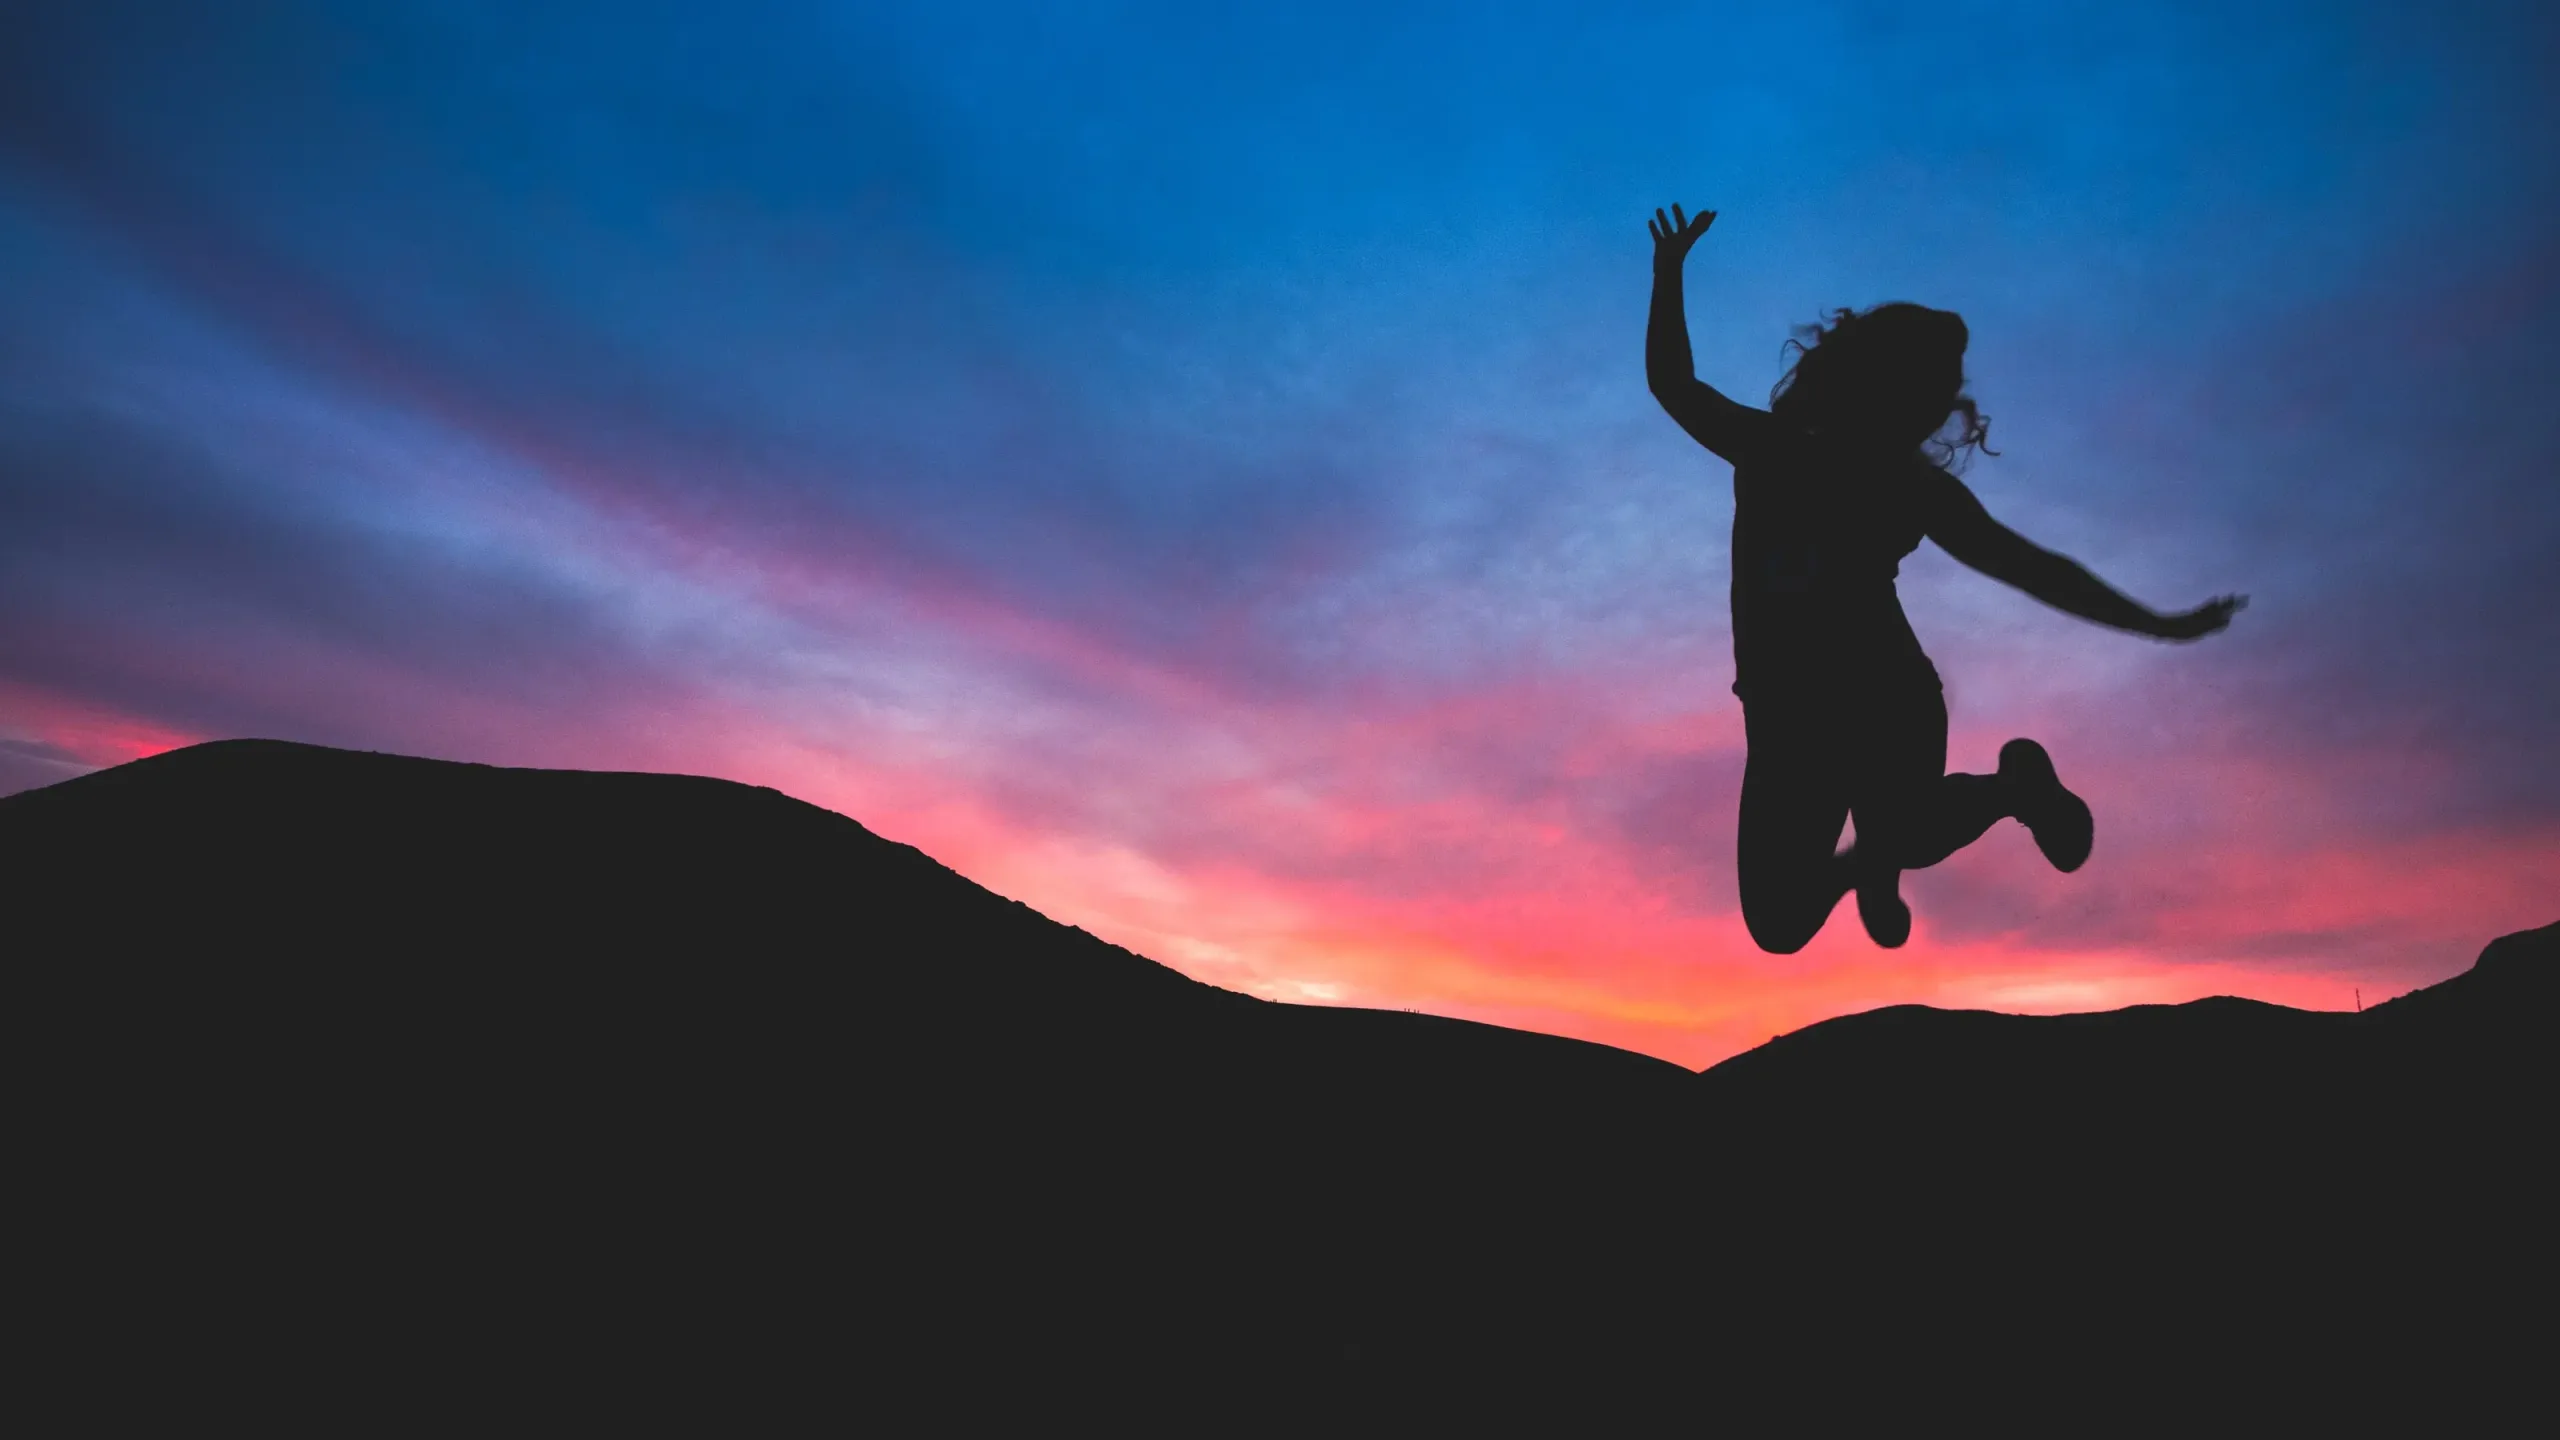 This picture shows someone jumping in the air happily. I hope you will feel this way after therapy with Juline Counselling!